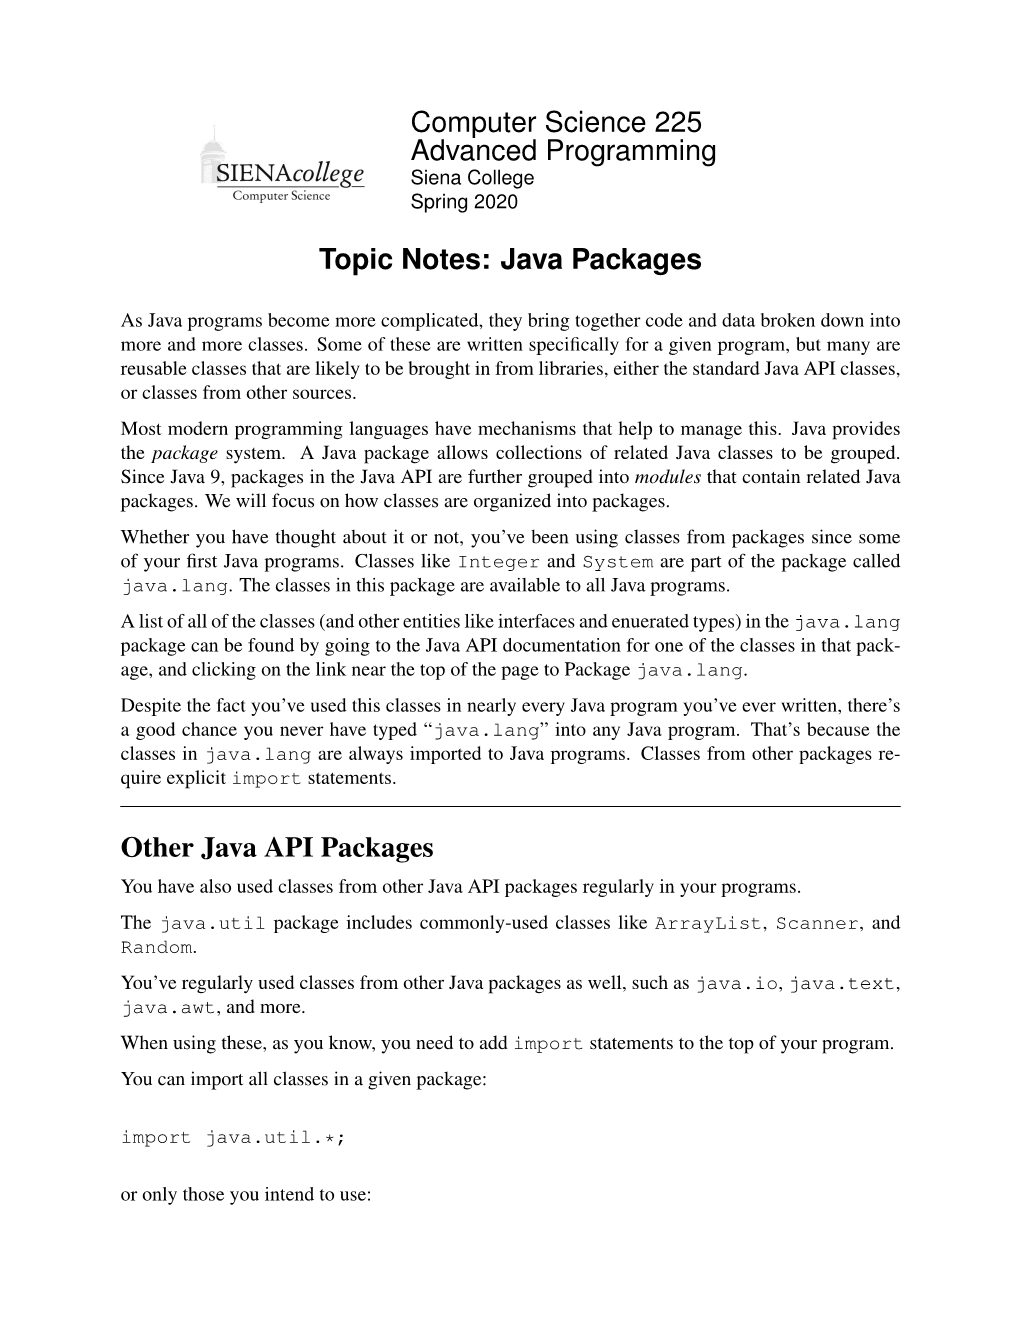 Computer Science 225 Advanced Programming Topic Notes: Java